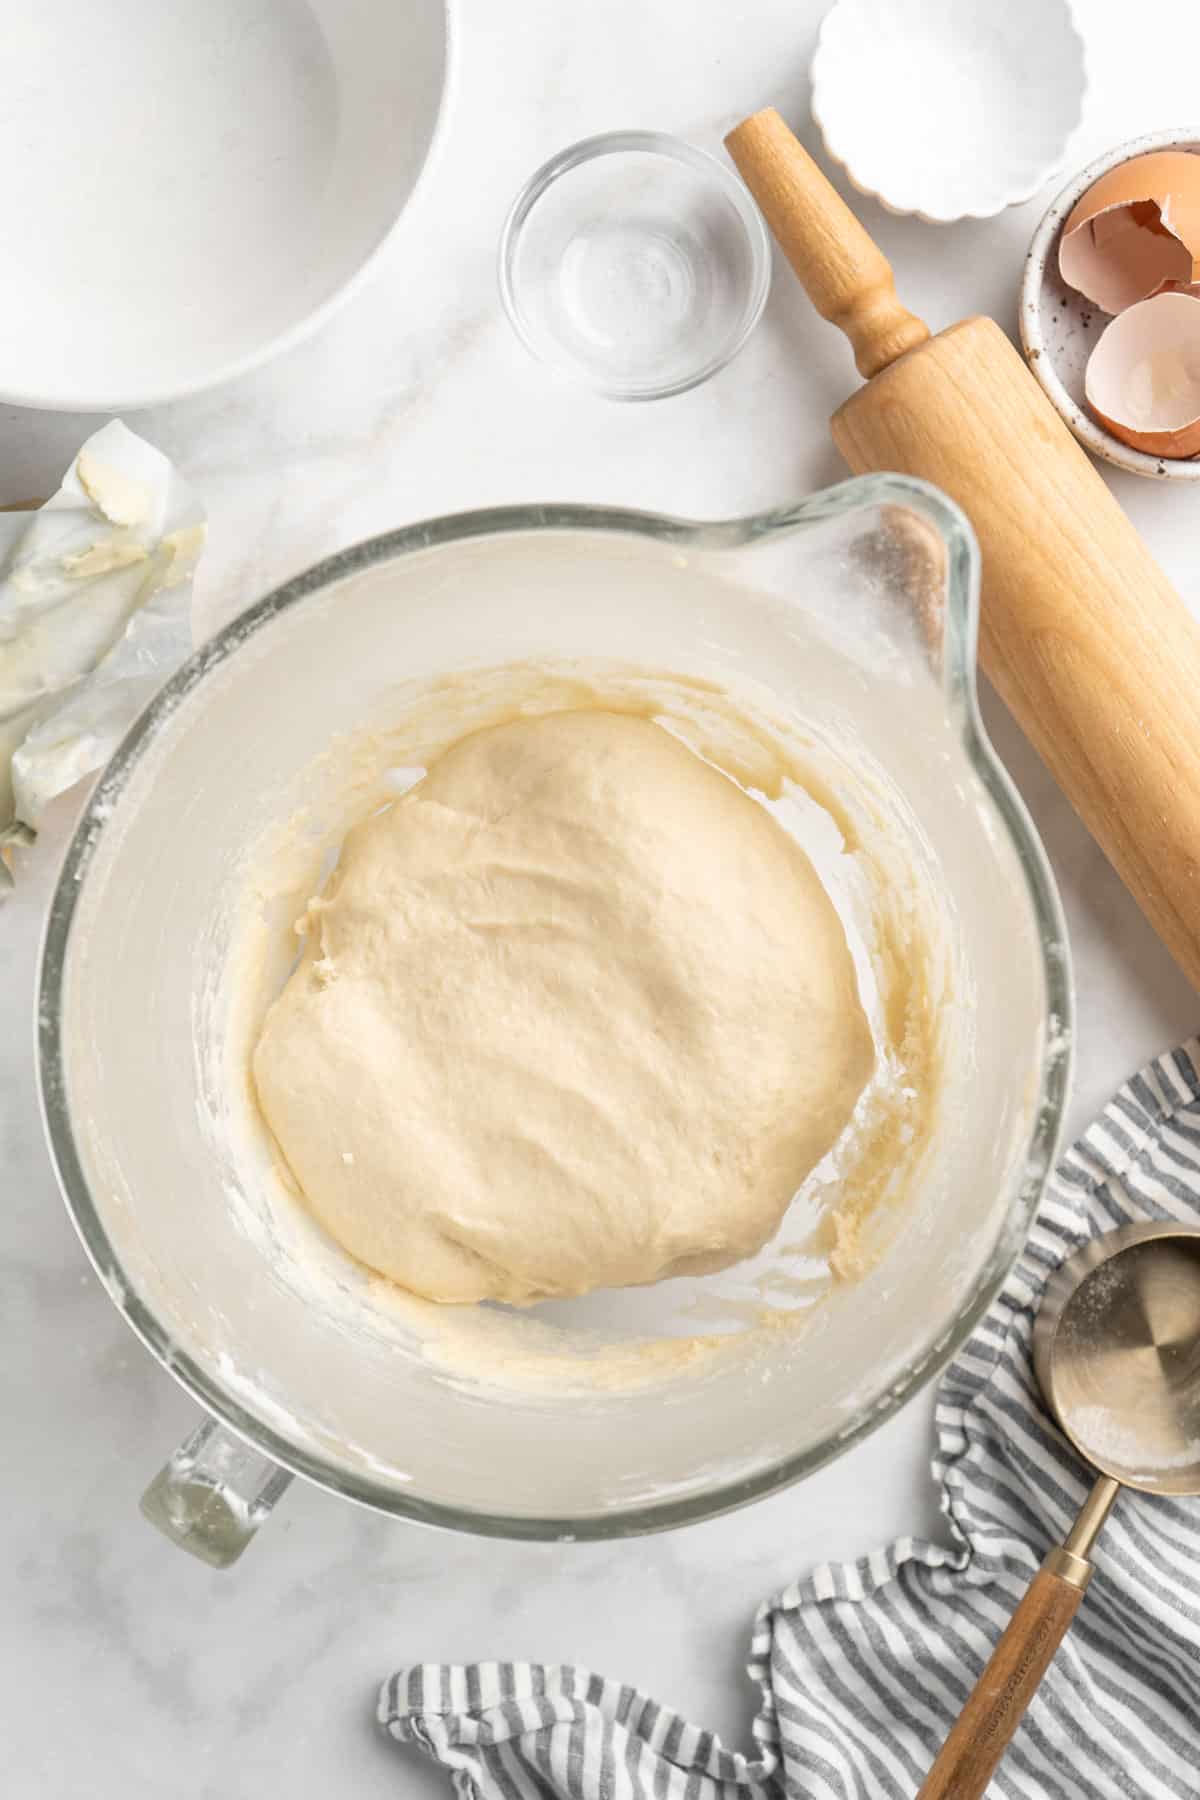 Kneaded dough in a large bowl.